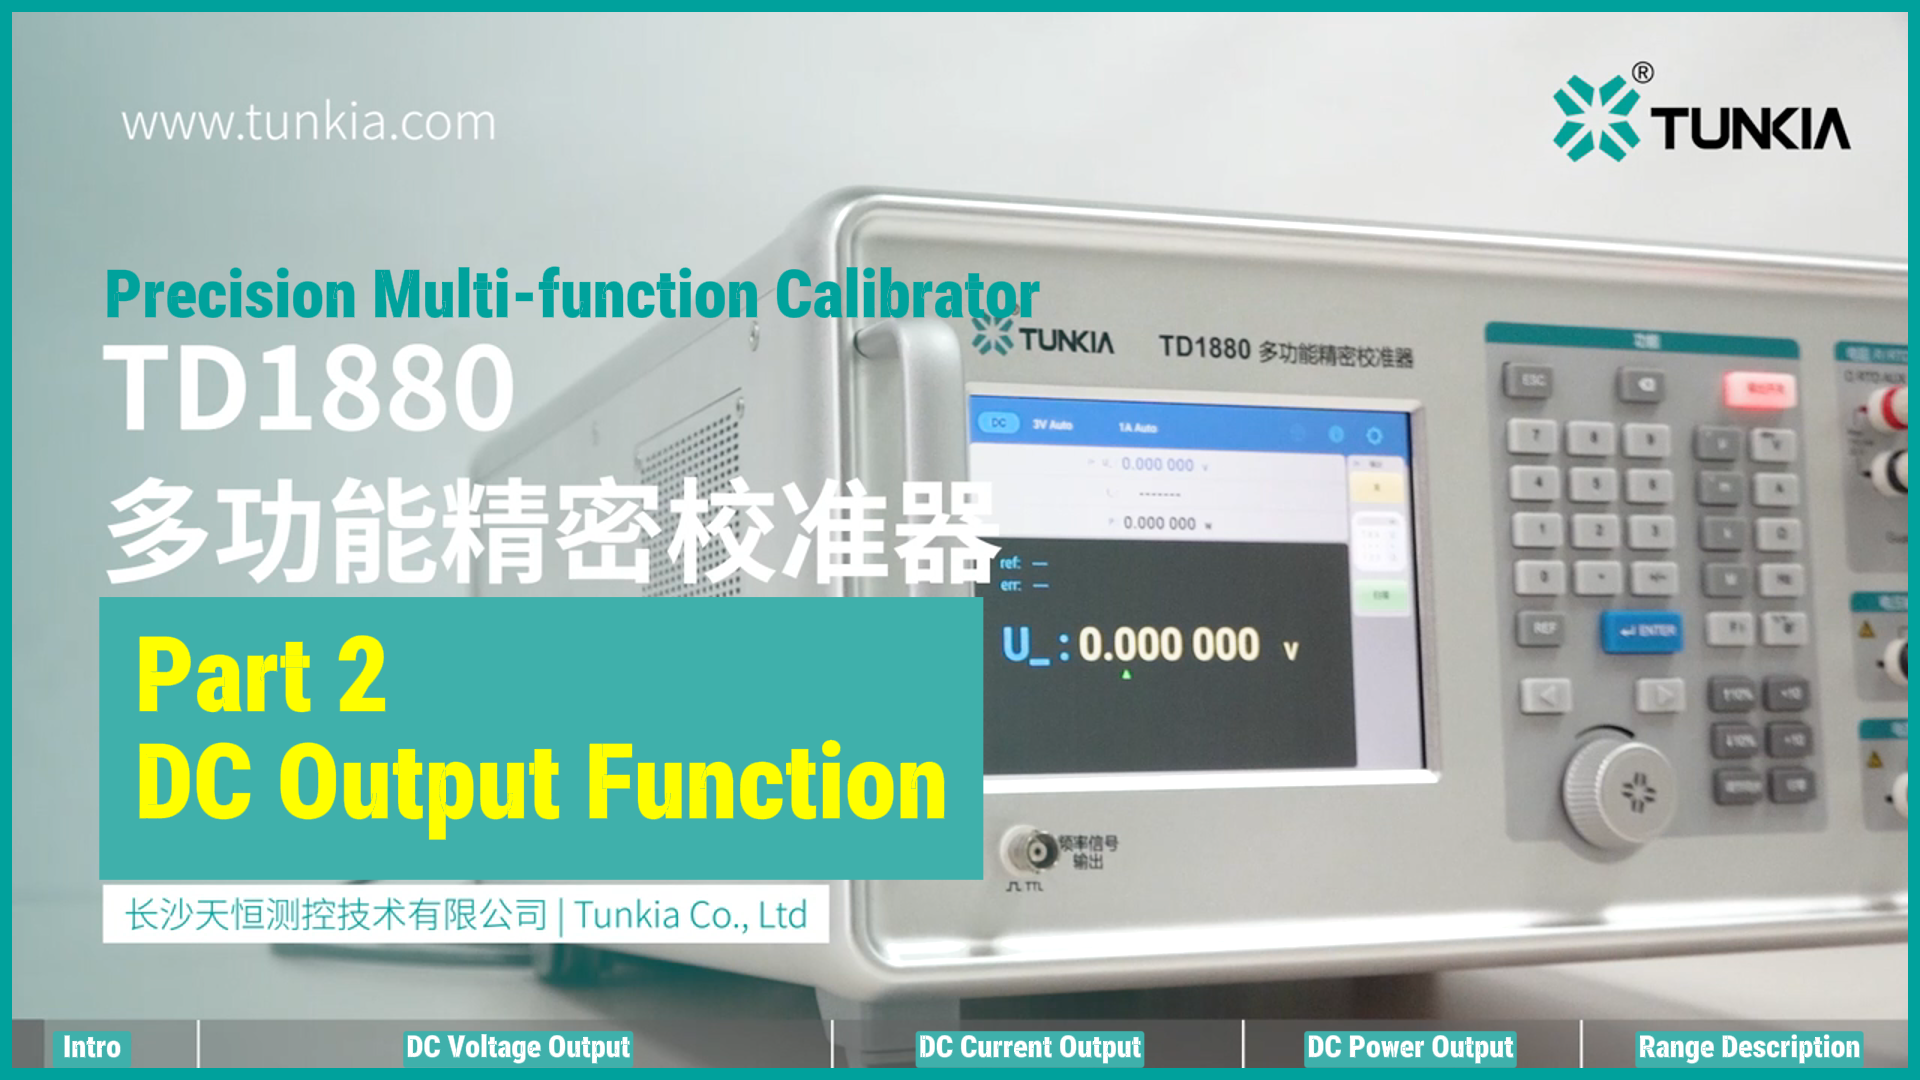 How to use the DC output function of the TD1880 multifunction calibrator?